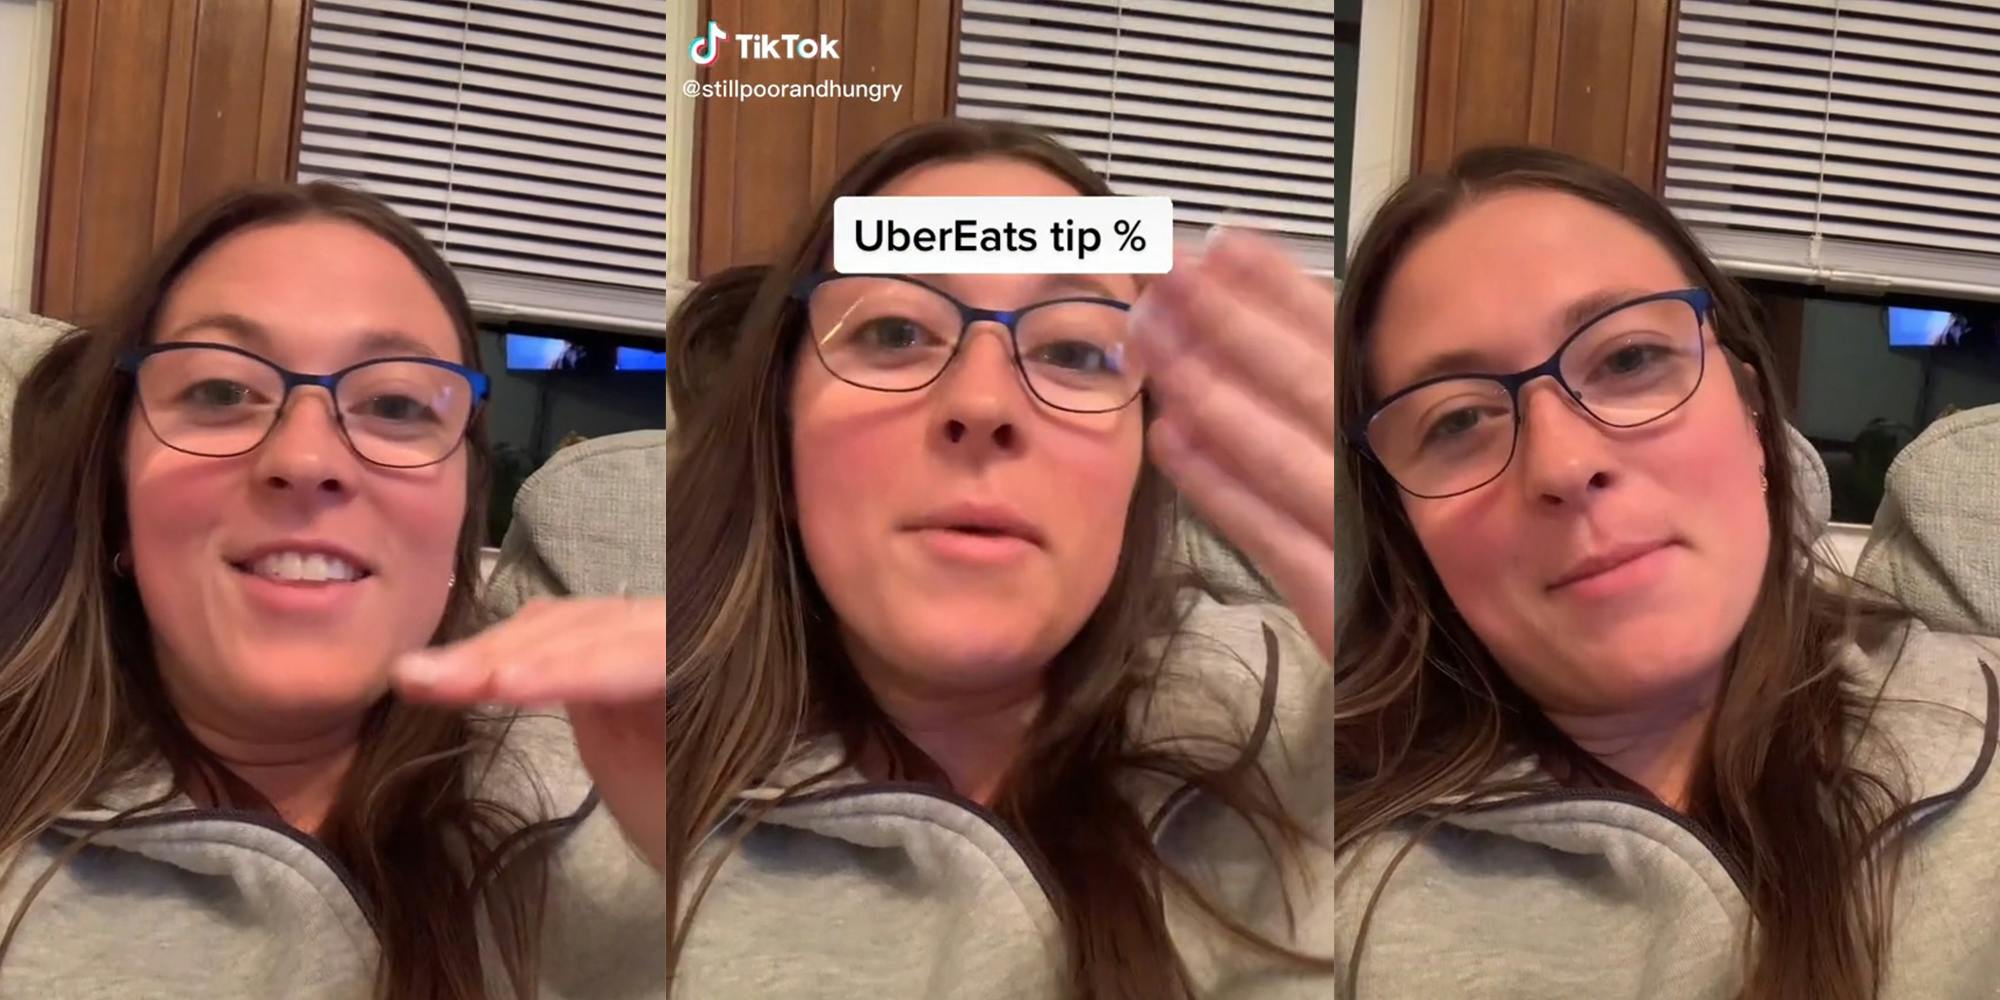 woman with caption "ubereats tip %"